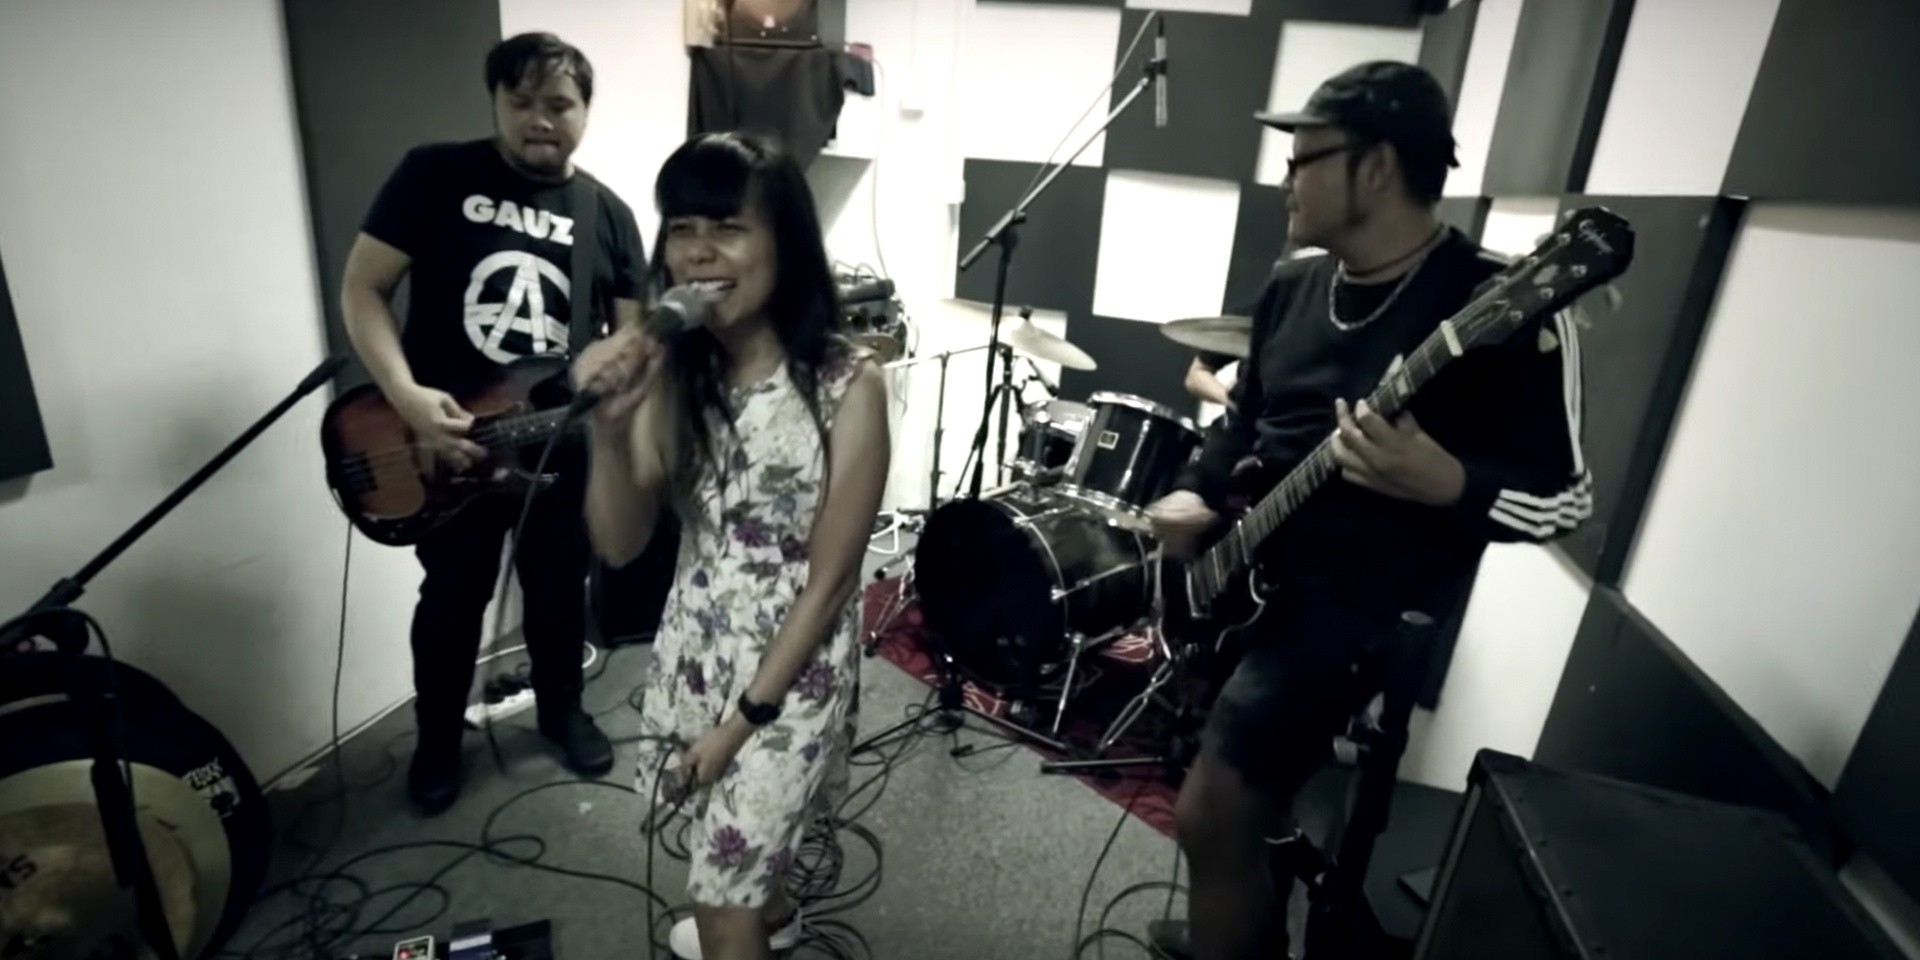 New video series Static City captures live sessions with Singaporean alternative, punk and hardcore bands – watch